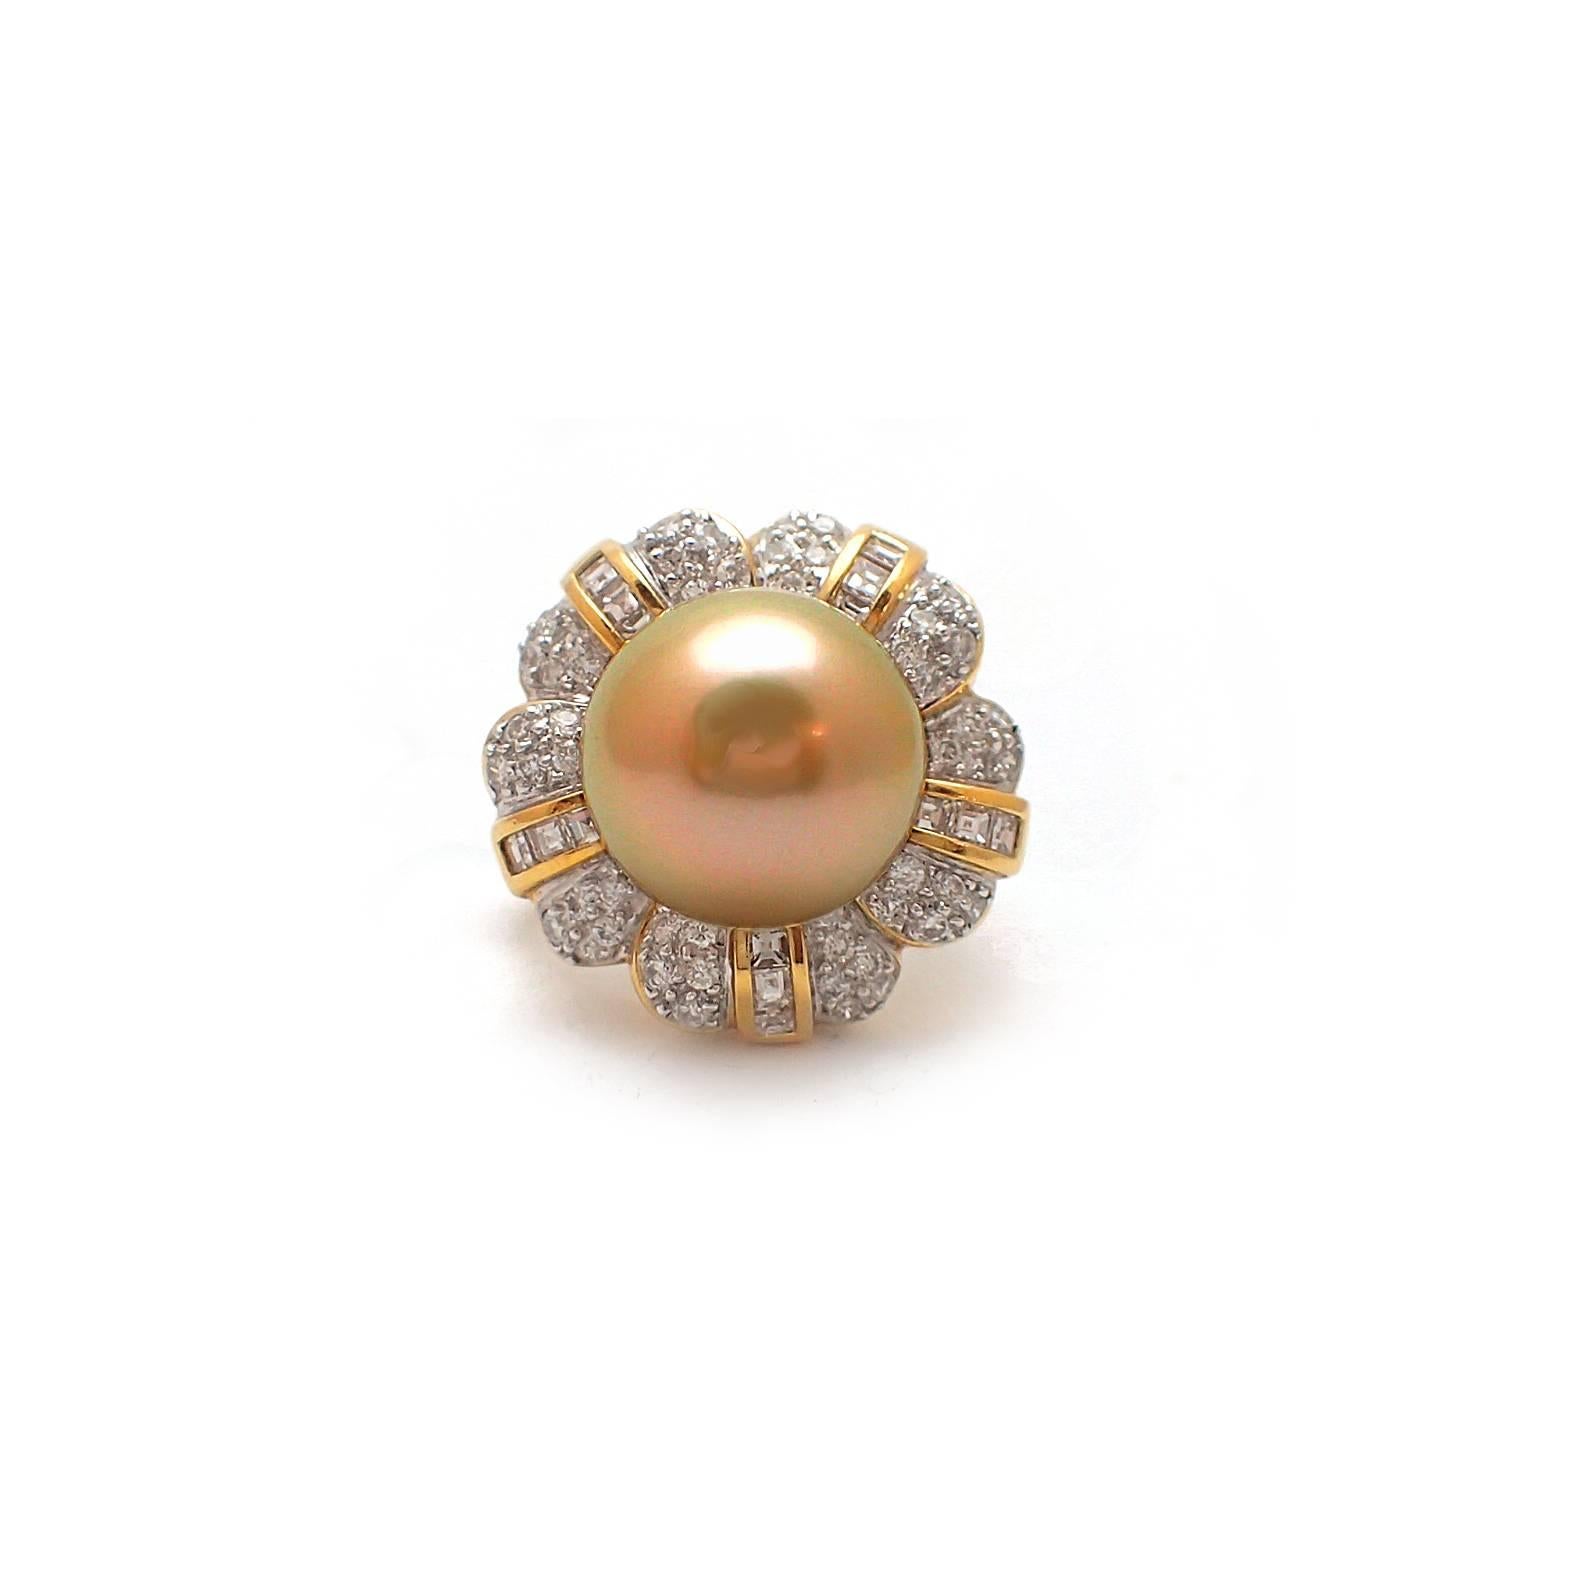 Luxurious golden South Sea pearl and diamond ring.  Features a 13mm round SS pearl and surrounded by 1.25ct of square and round diamonds.  Set in 18k two tone mounting. G color, VS2-SI1 clarity.